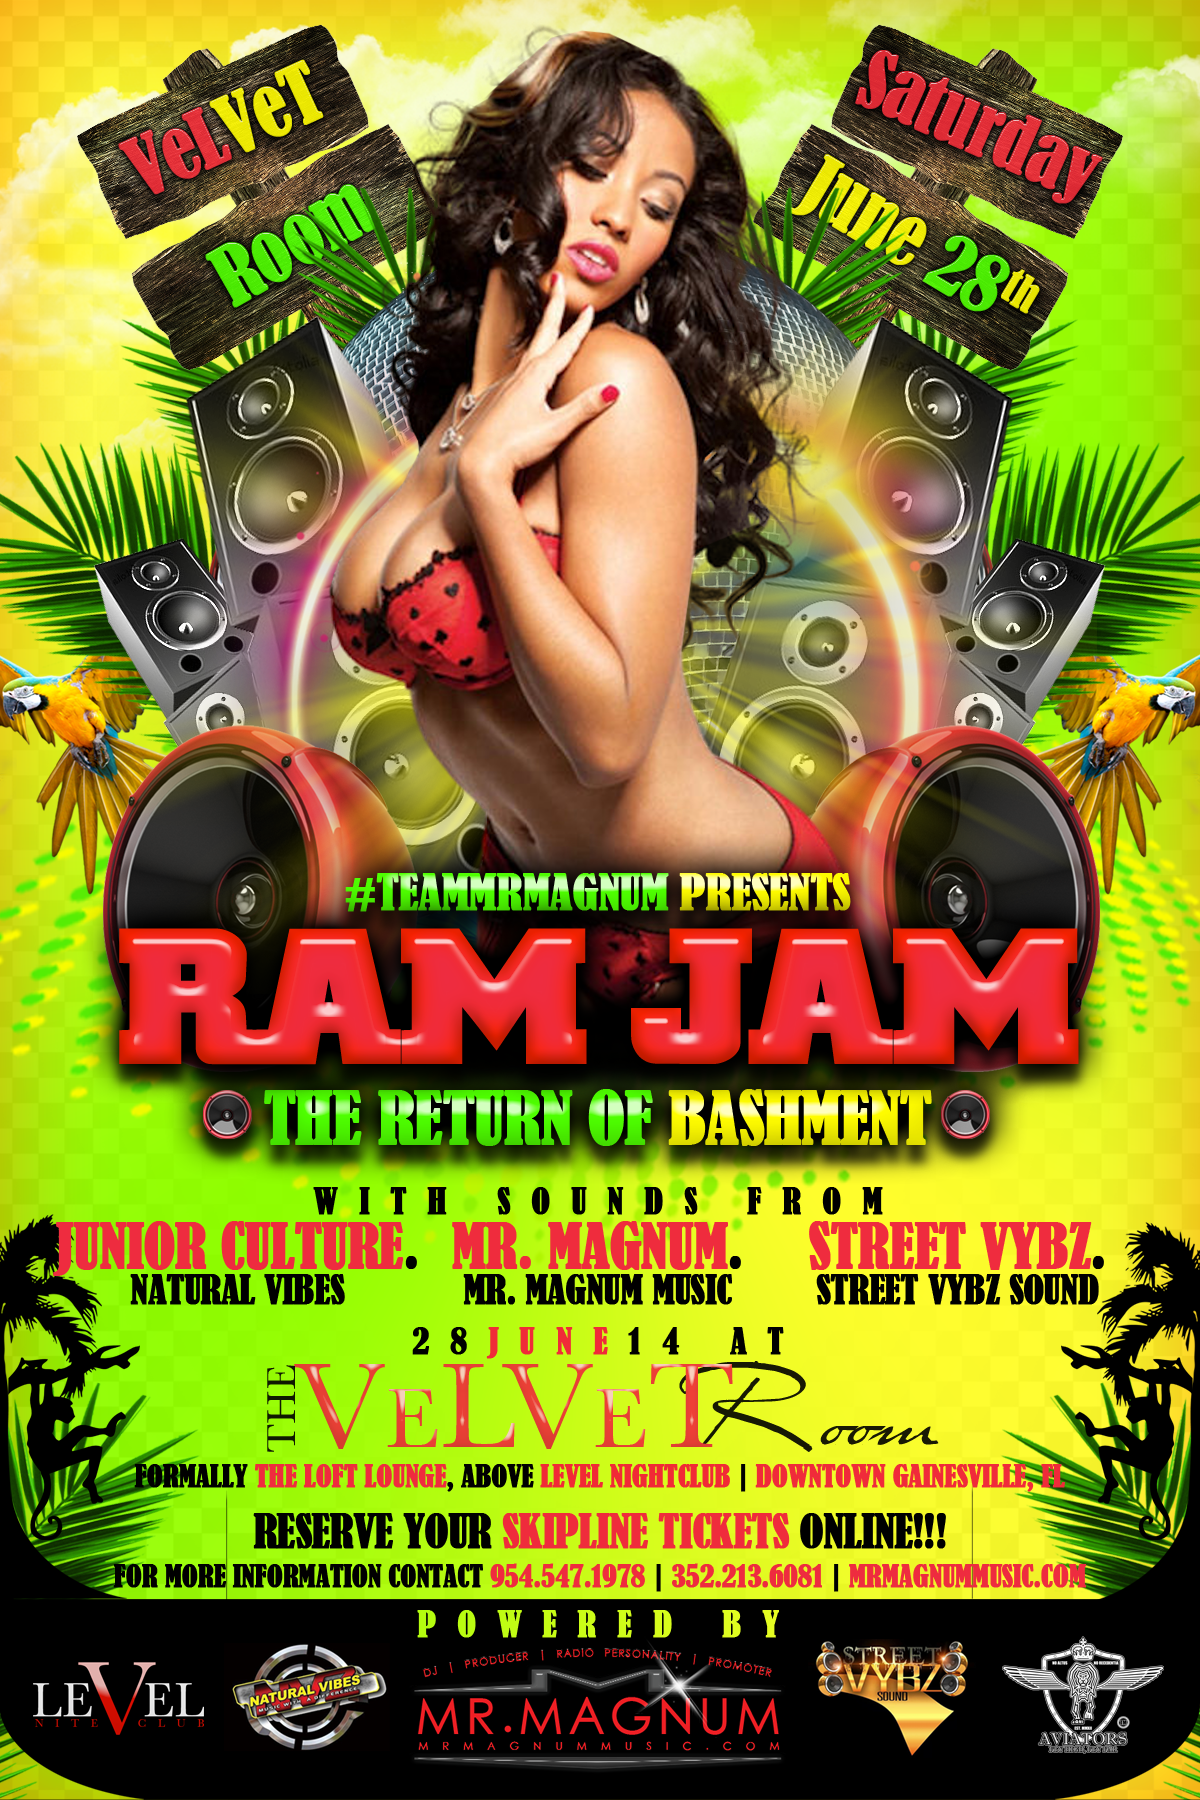 Junior Culture from Natural Vibes Sound, Mr. Magnum and Street Vybz Sound from Orlando Featured DJs at Ram Jam